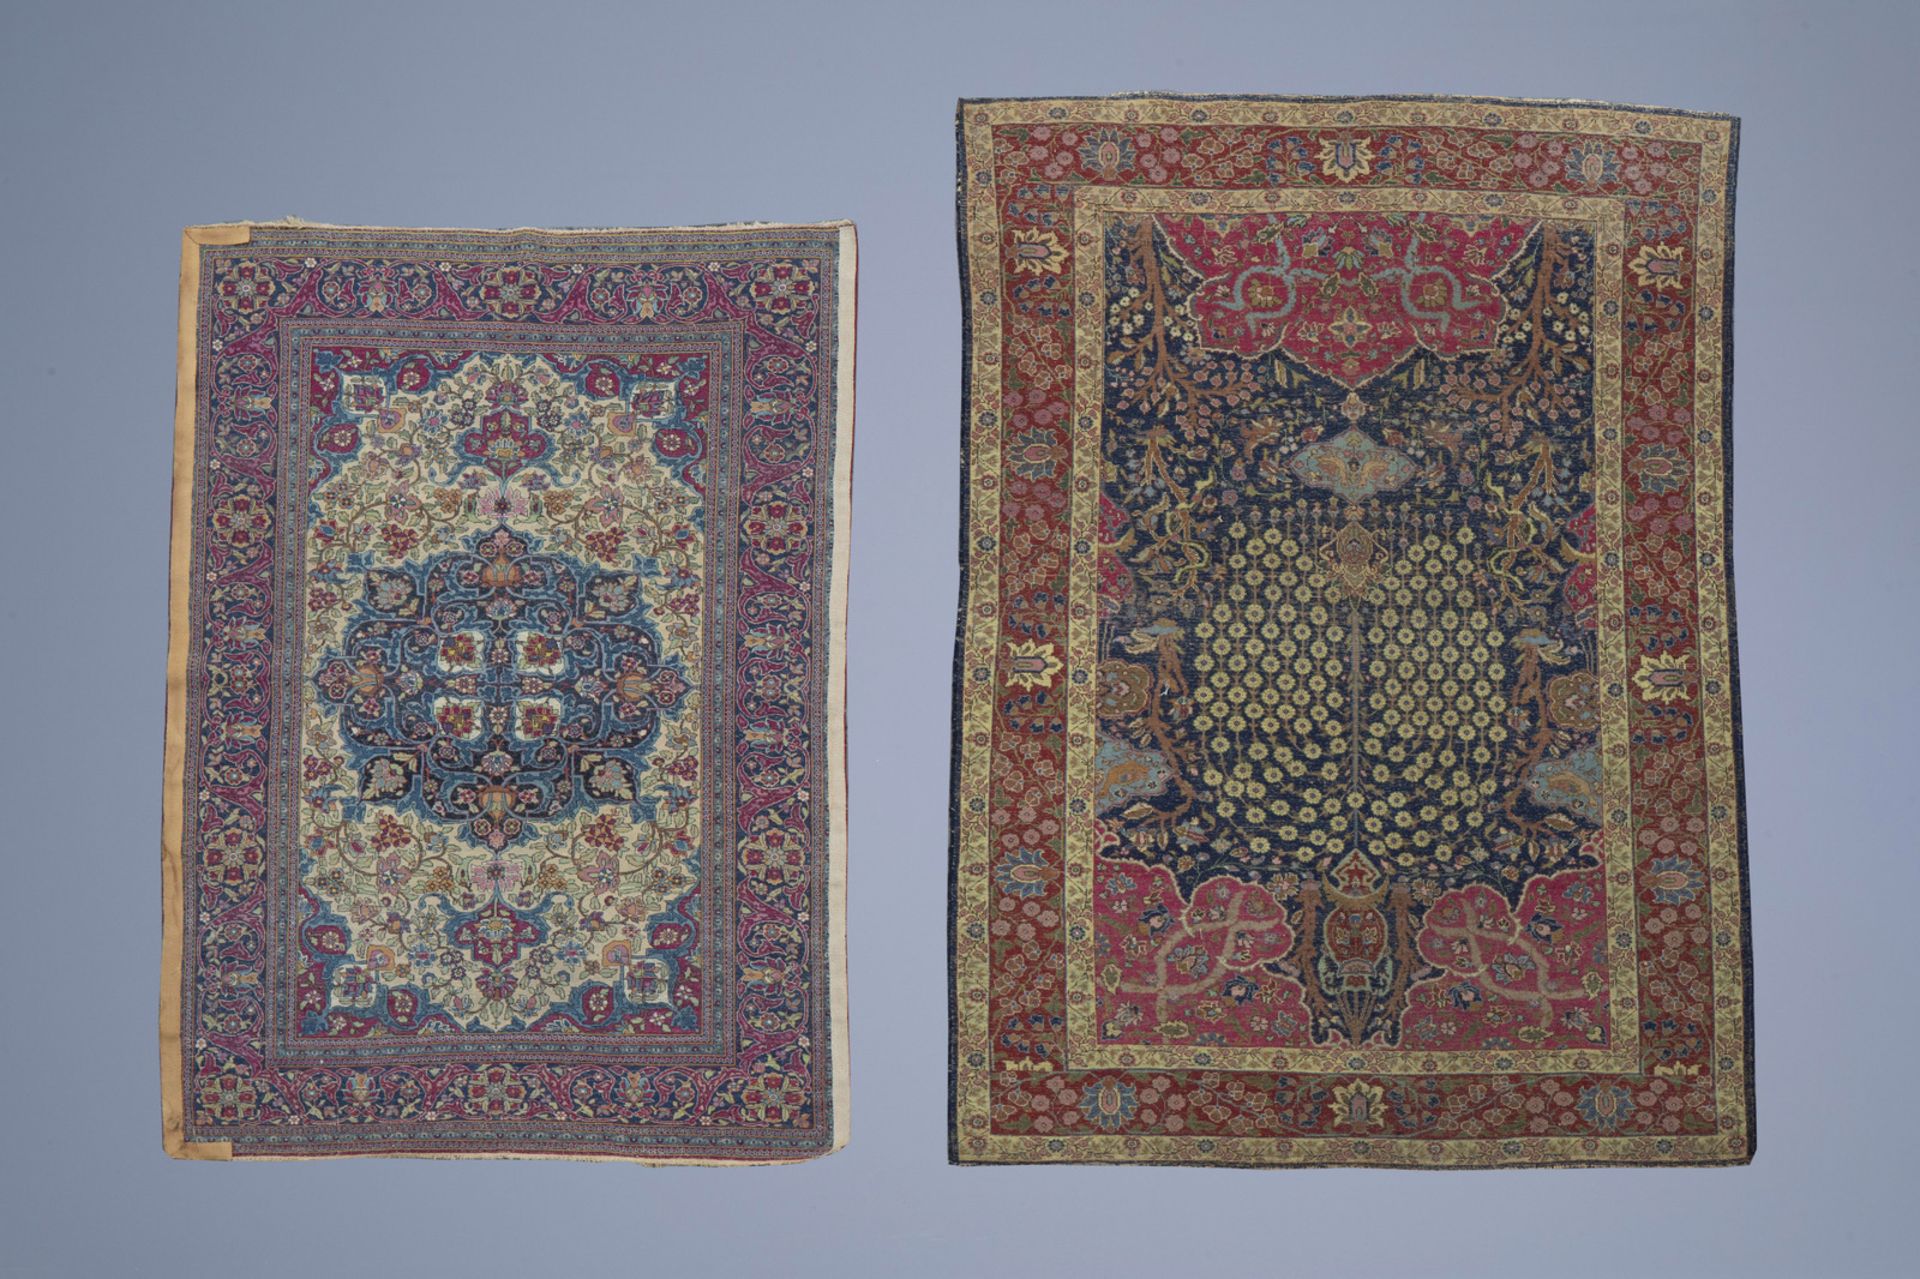 Two Oriental rugs with floral design, wool and silk on cotton, 20th C. - Image 2 of 4